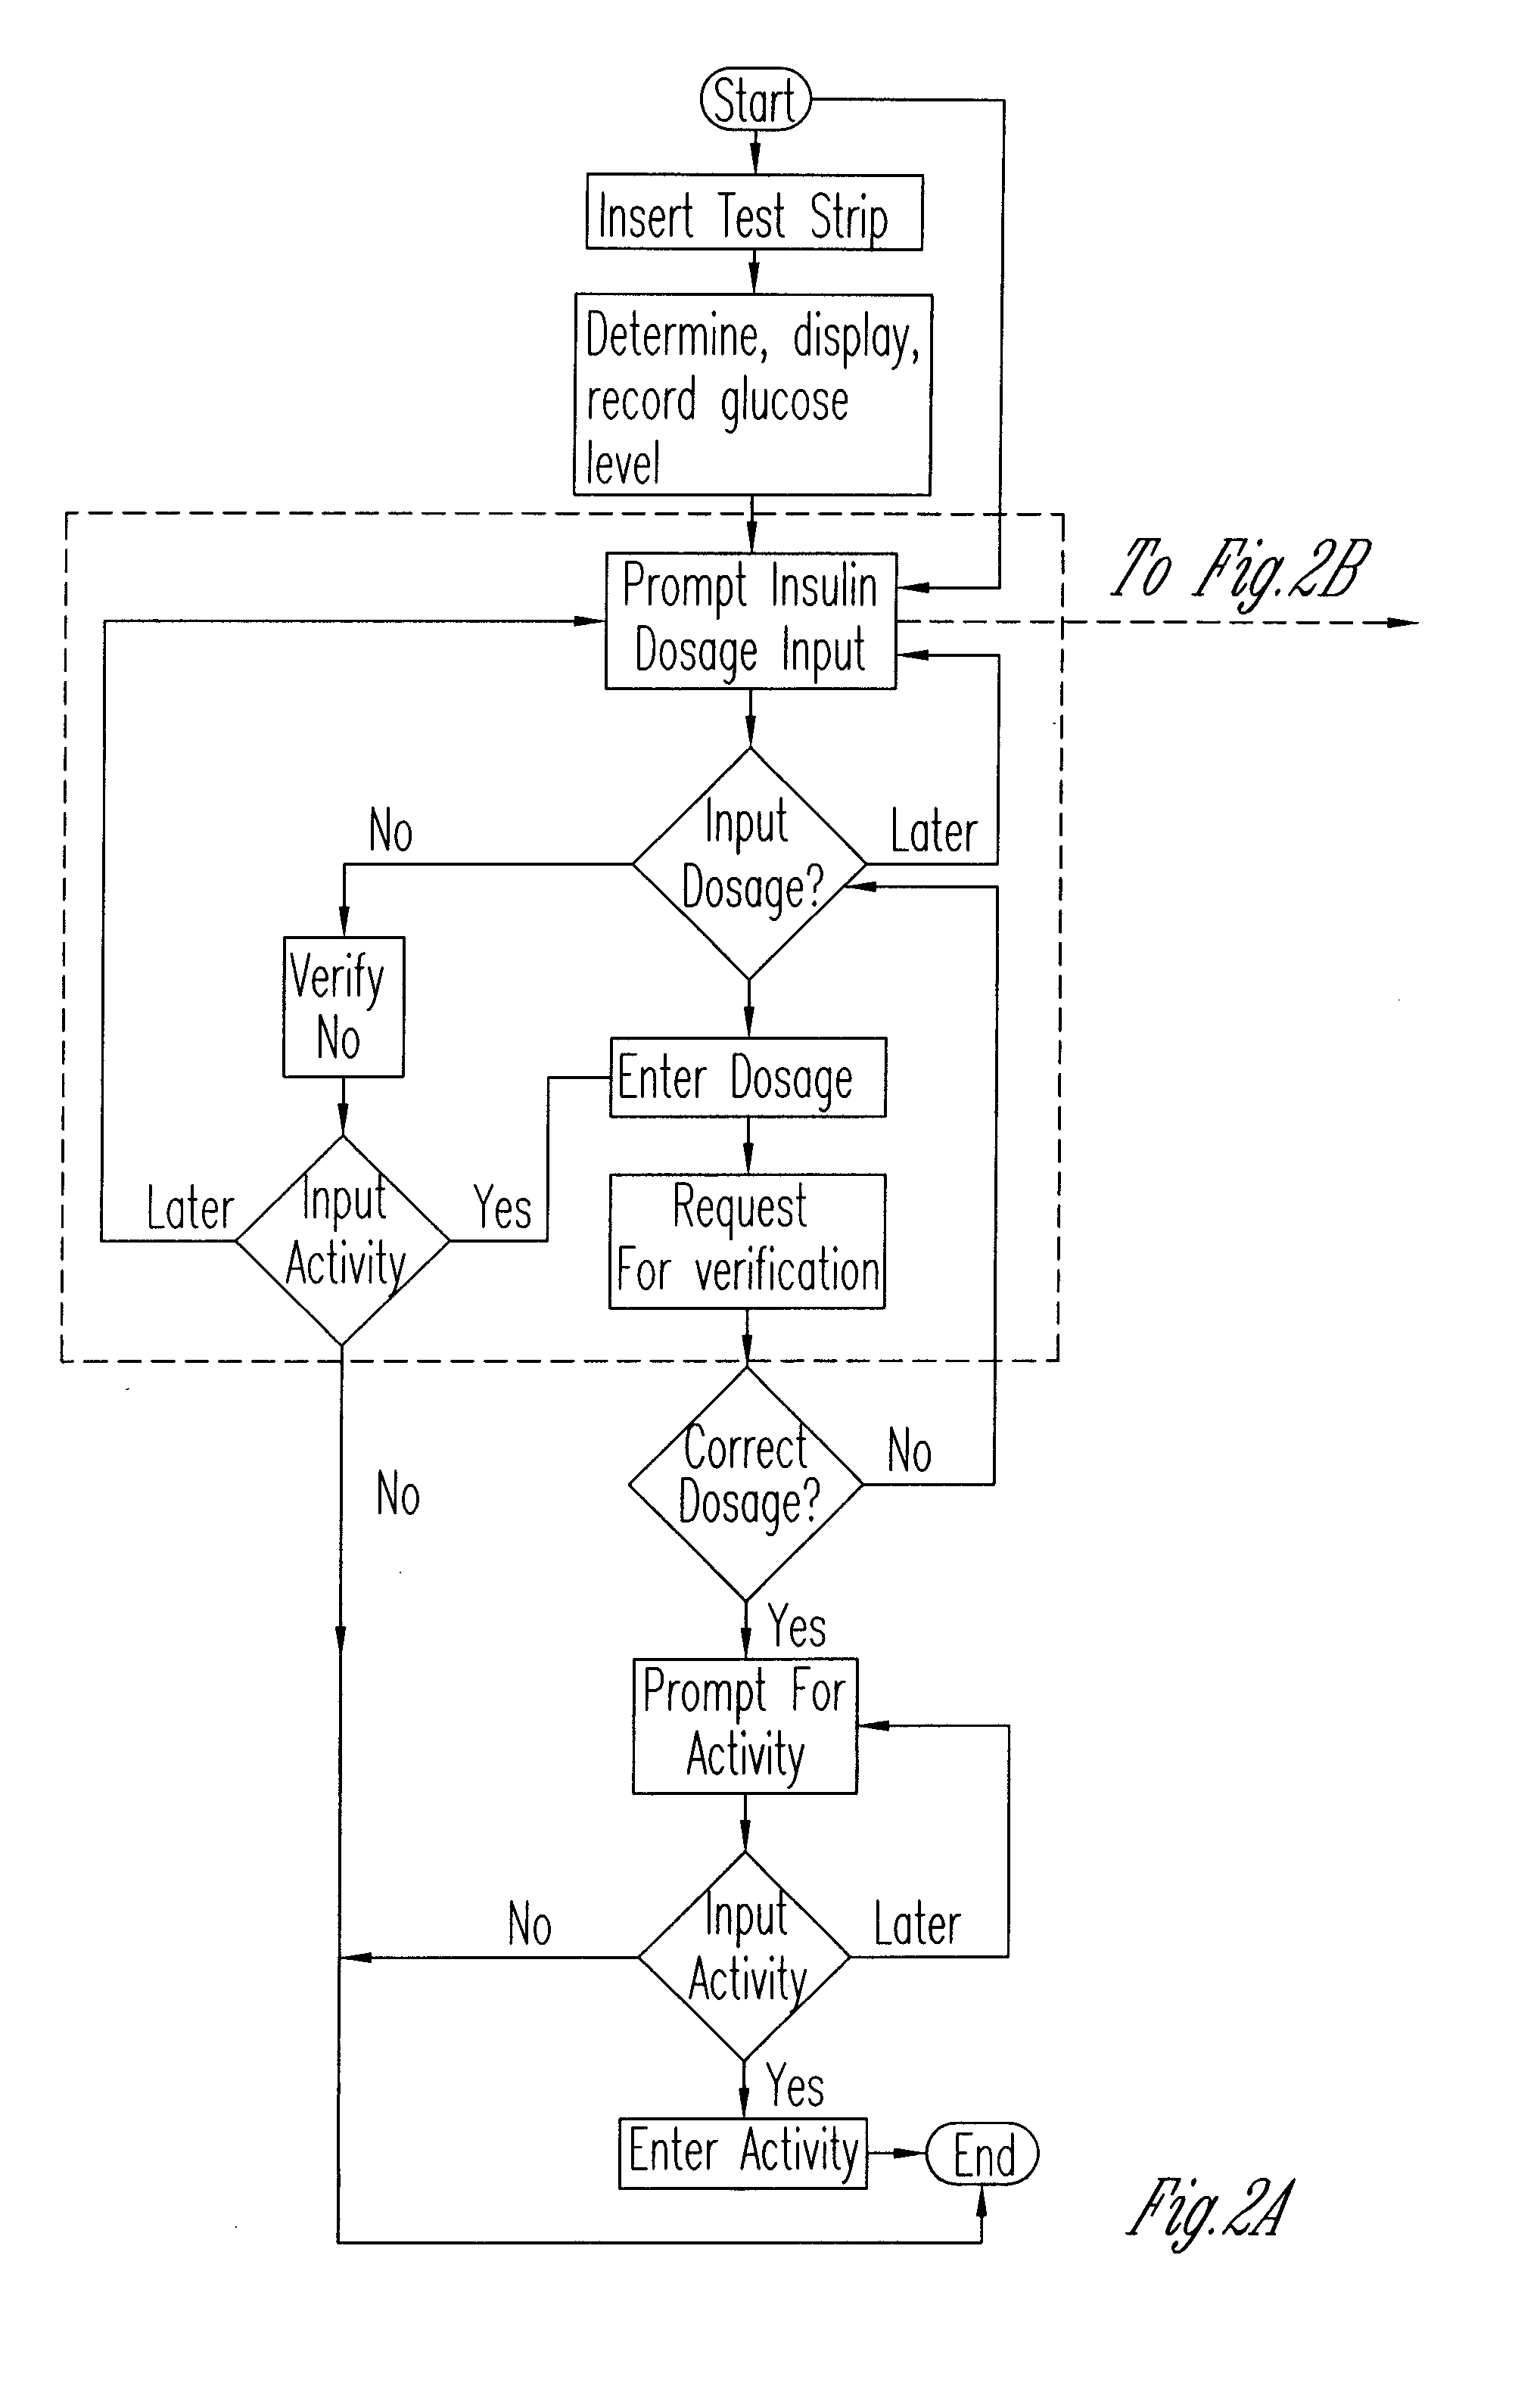 Glucose management device and method of using the same